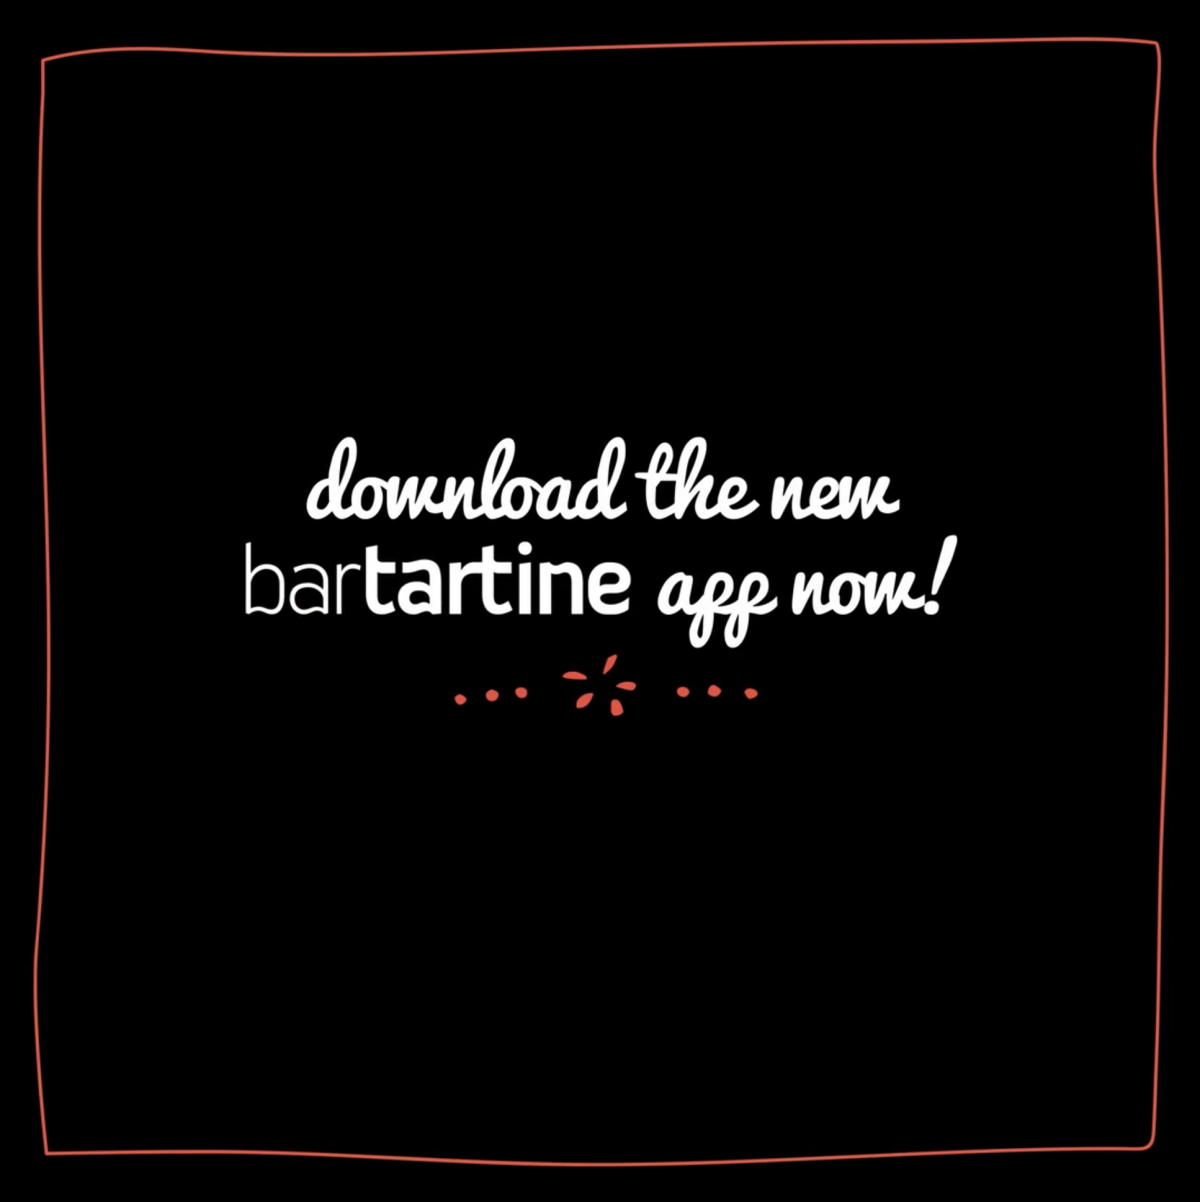 the all new bartartine mobile app!